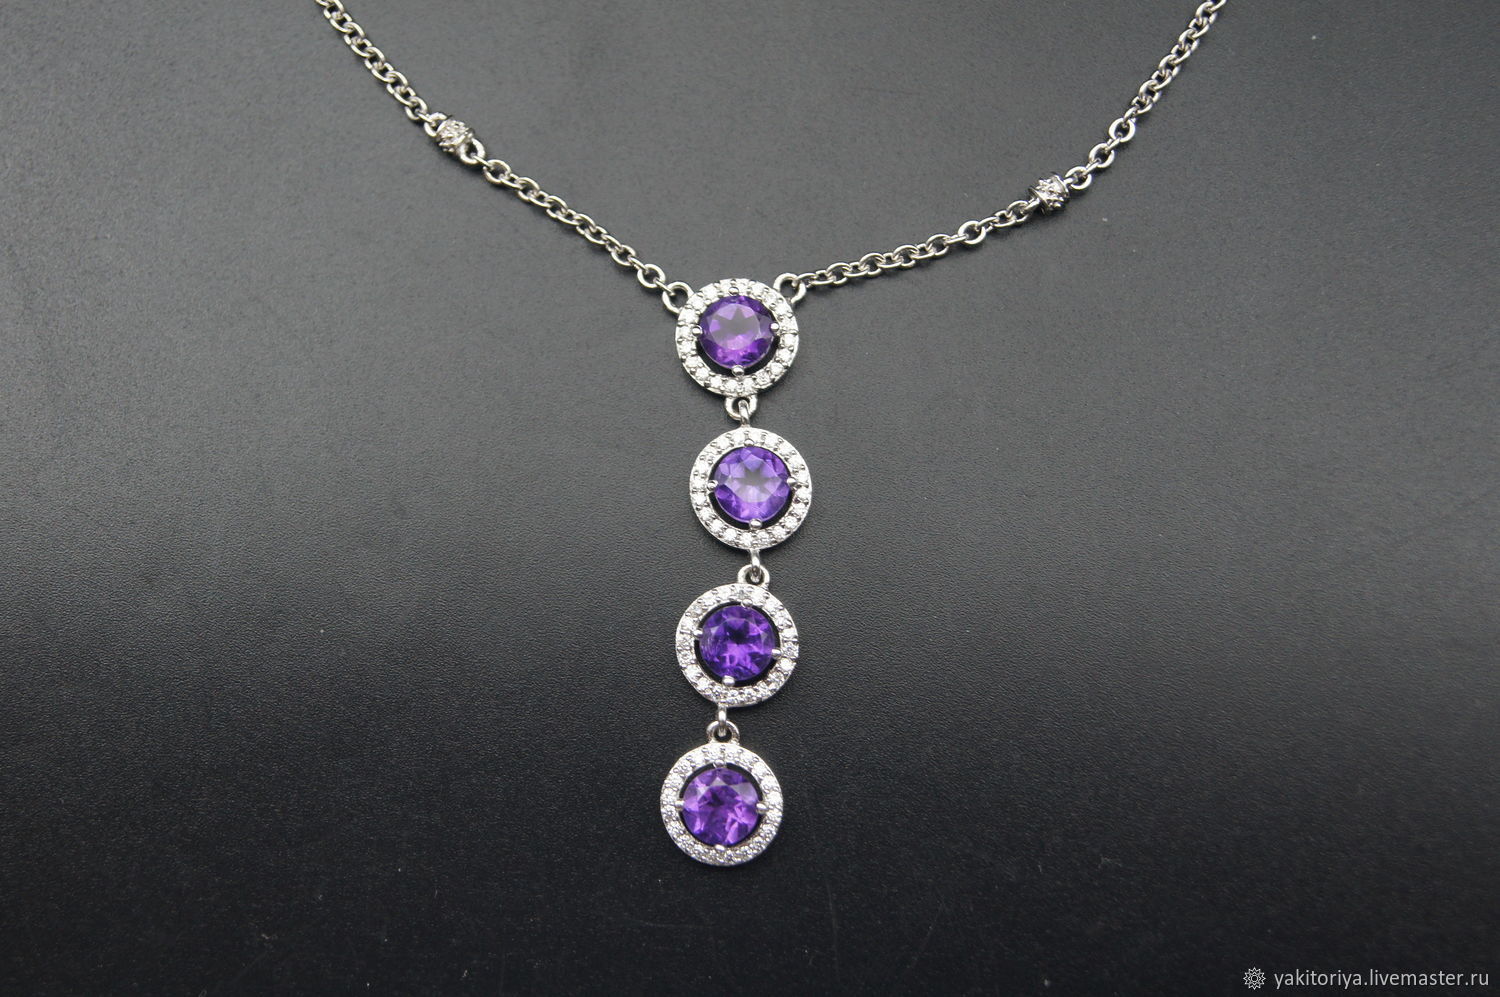 Silver necklace with amethysts 6 mm, Necklace, Moscow,  Фото №1